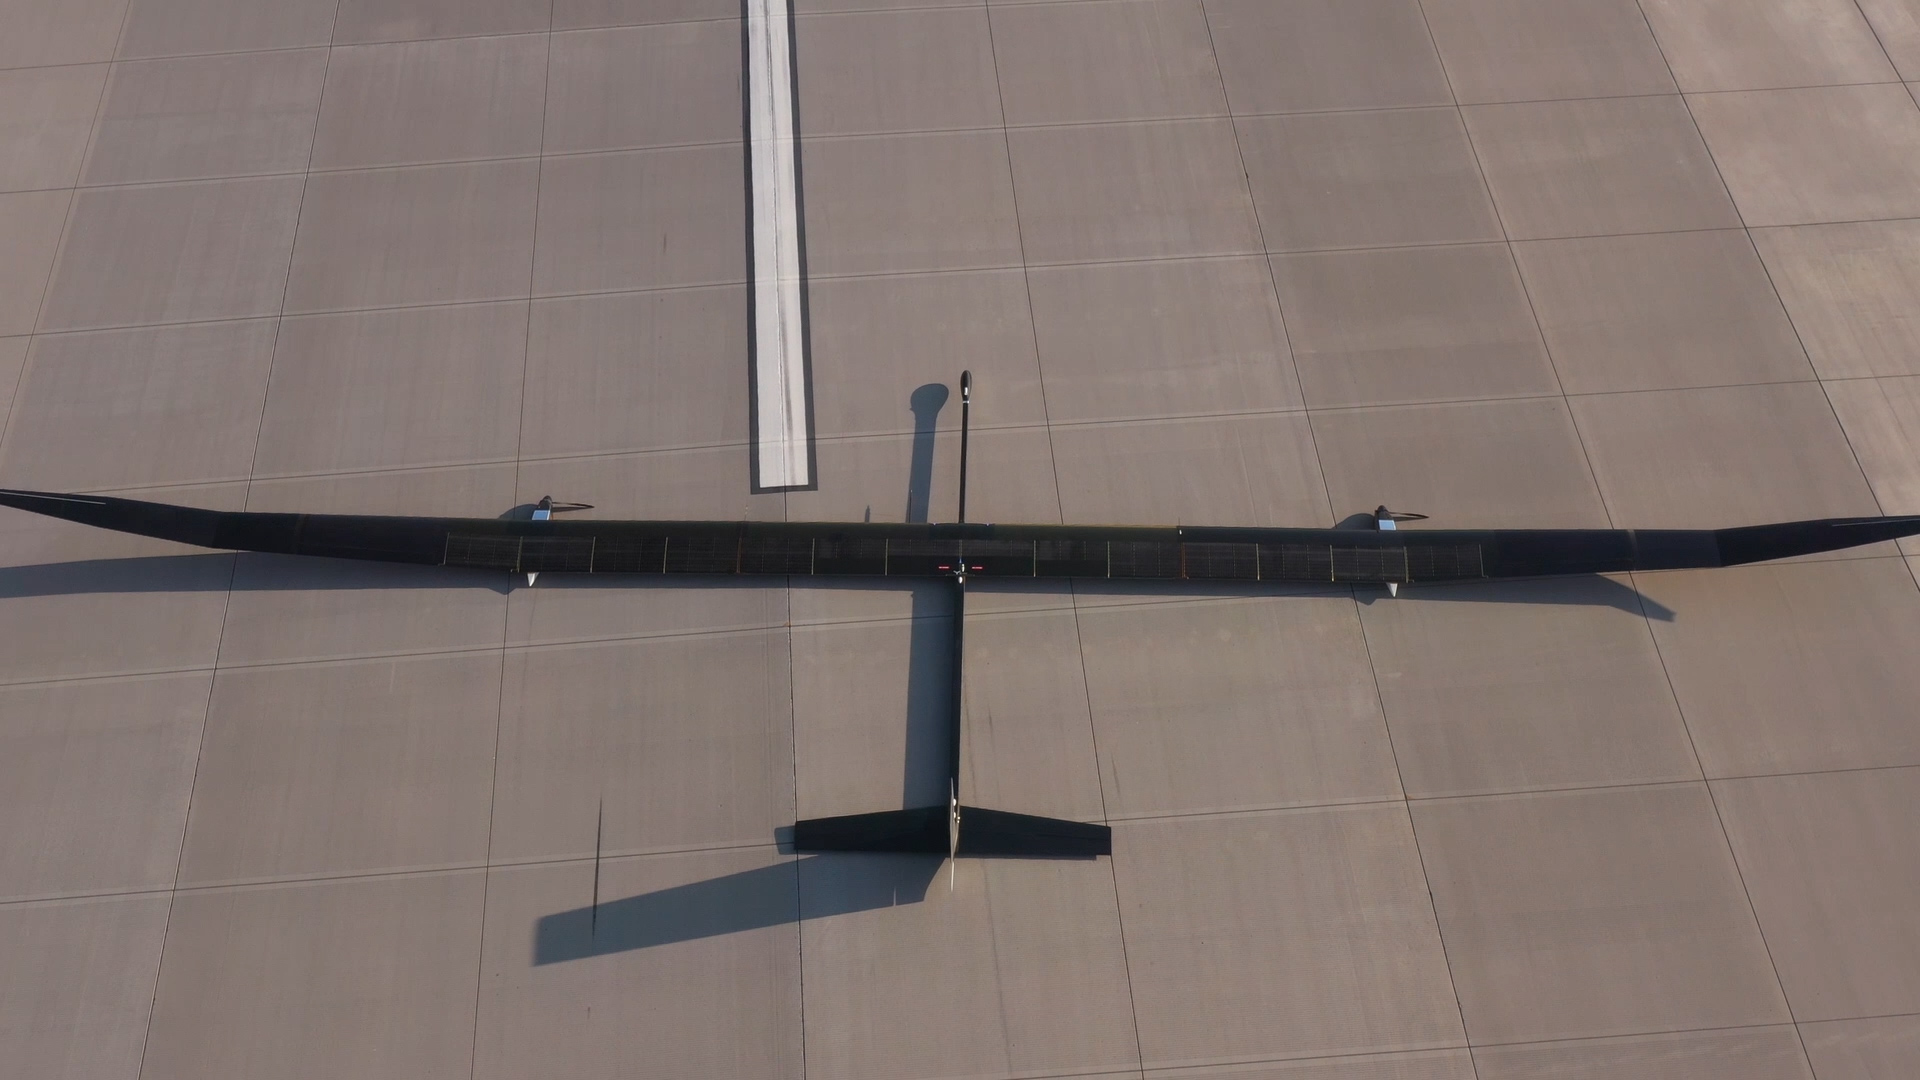 Top down image of the BAE Systems Prismatic PHASA-35 aircraft on a runway.